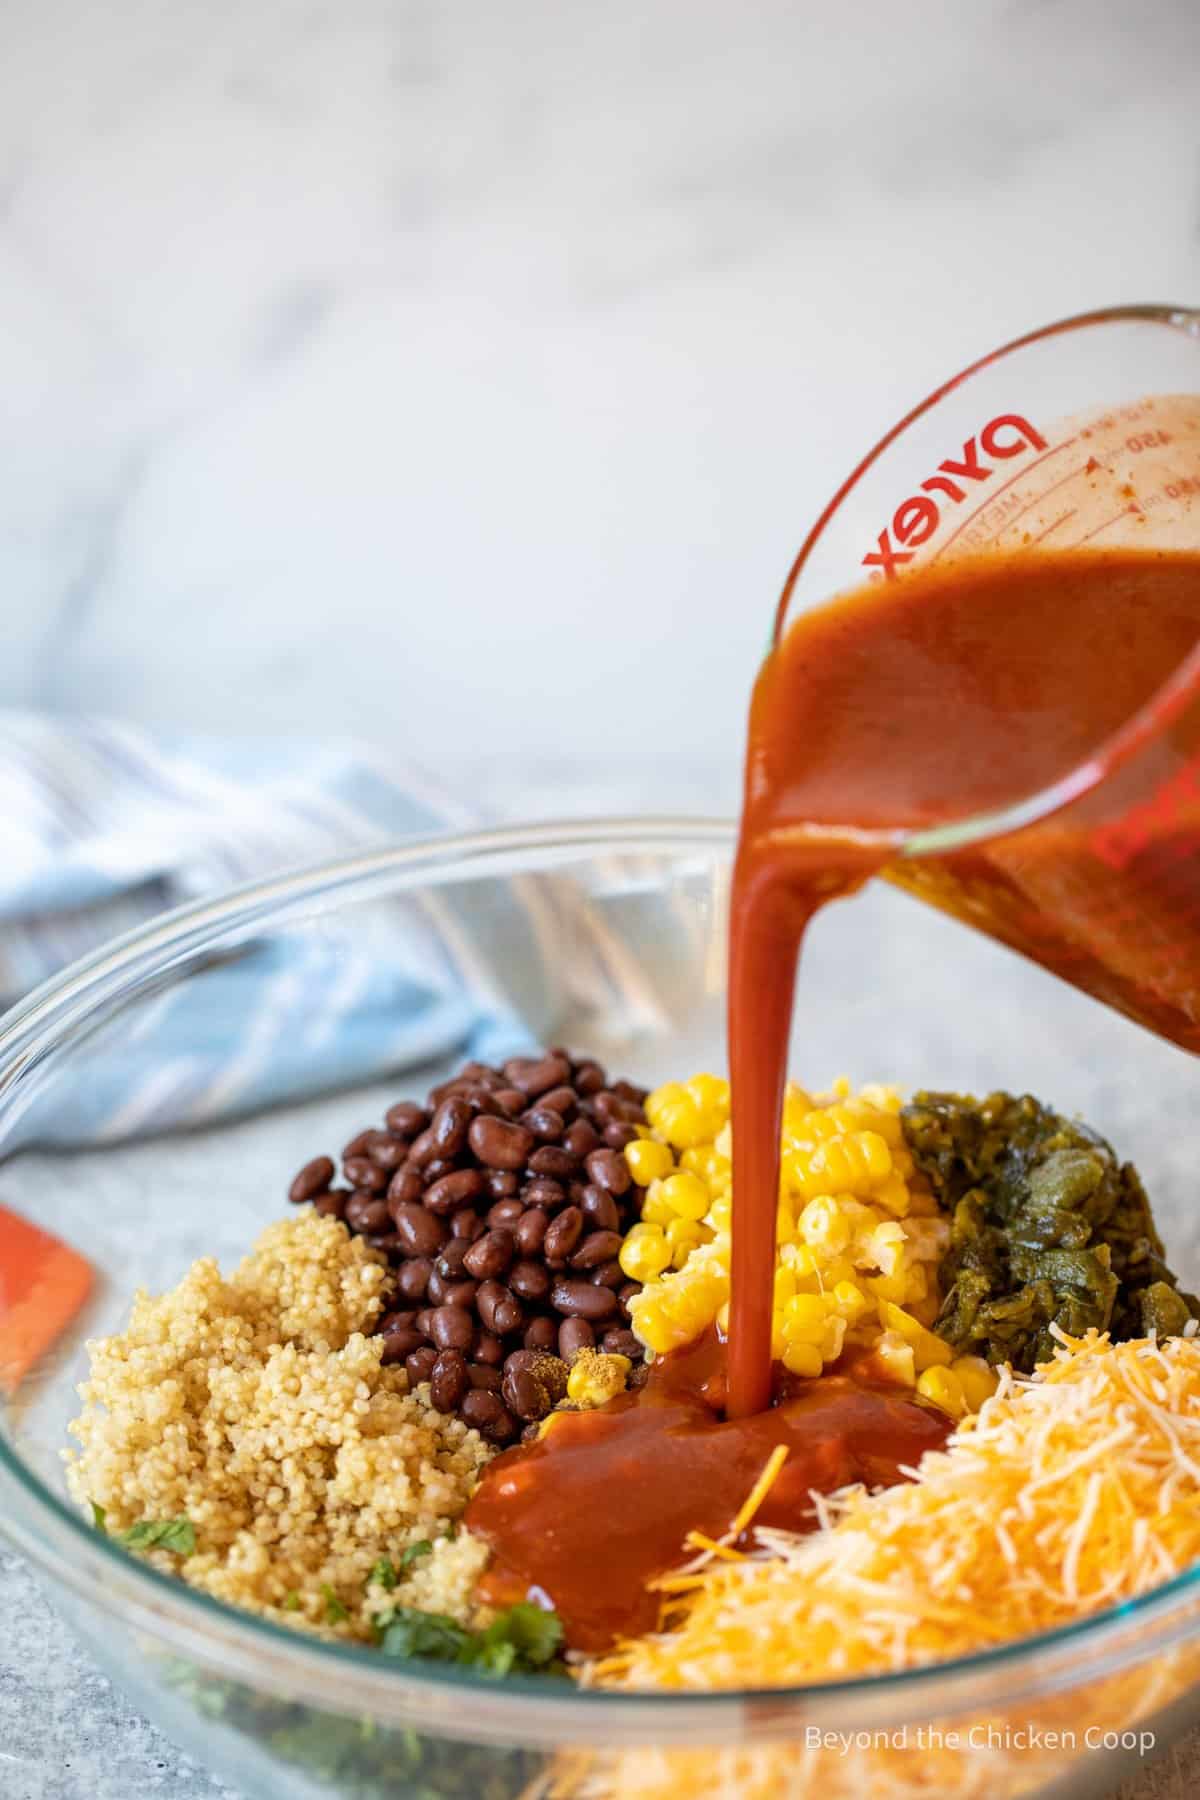 Pouring enchilada sauce over a bowl with corn, beans and cheese.